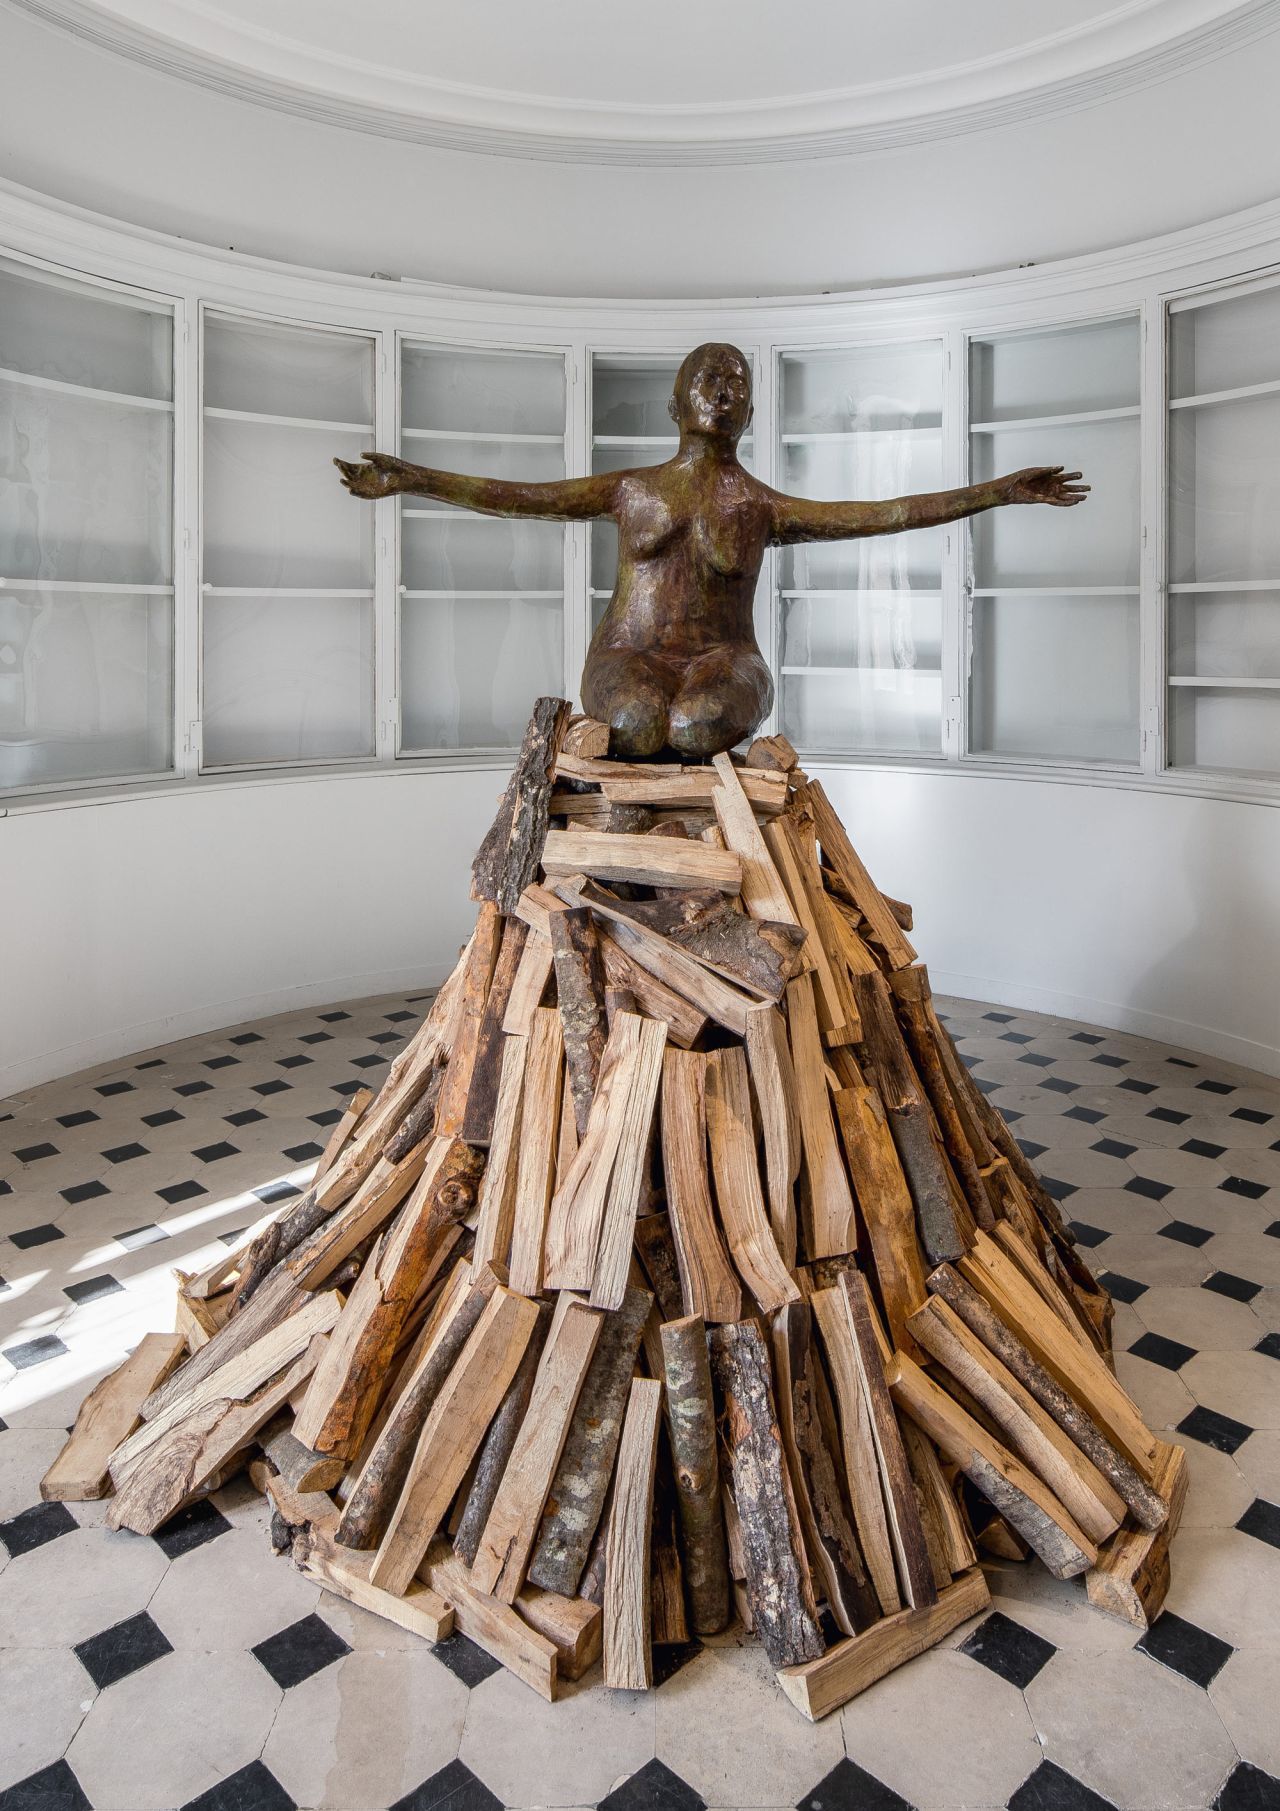 In Kiki Smith's work "Pyre	Woman	Kneeling," a bronze	 female figure tops a pyre. The statue commemorates	women who were	burned for witchcraft.